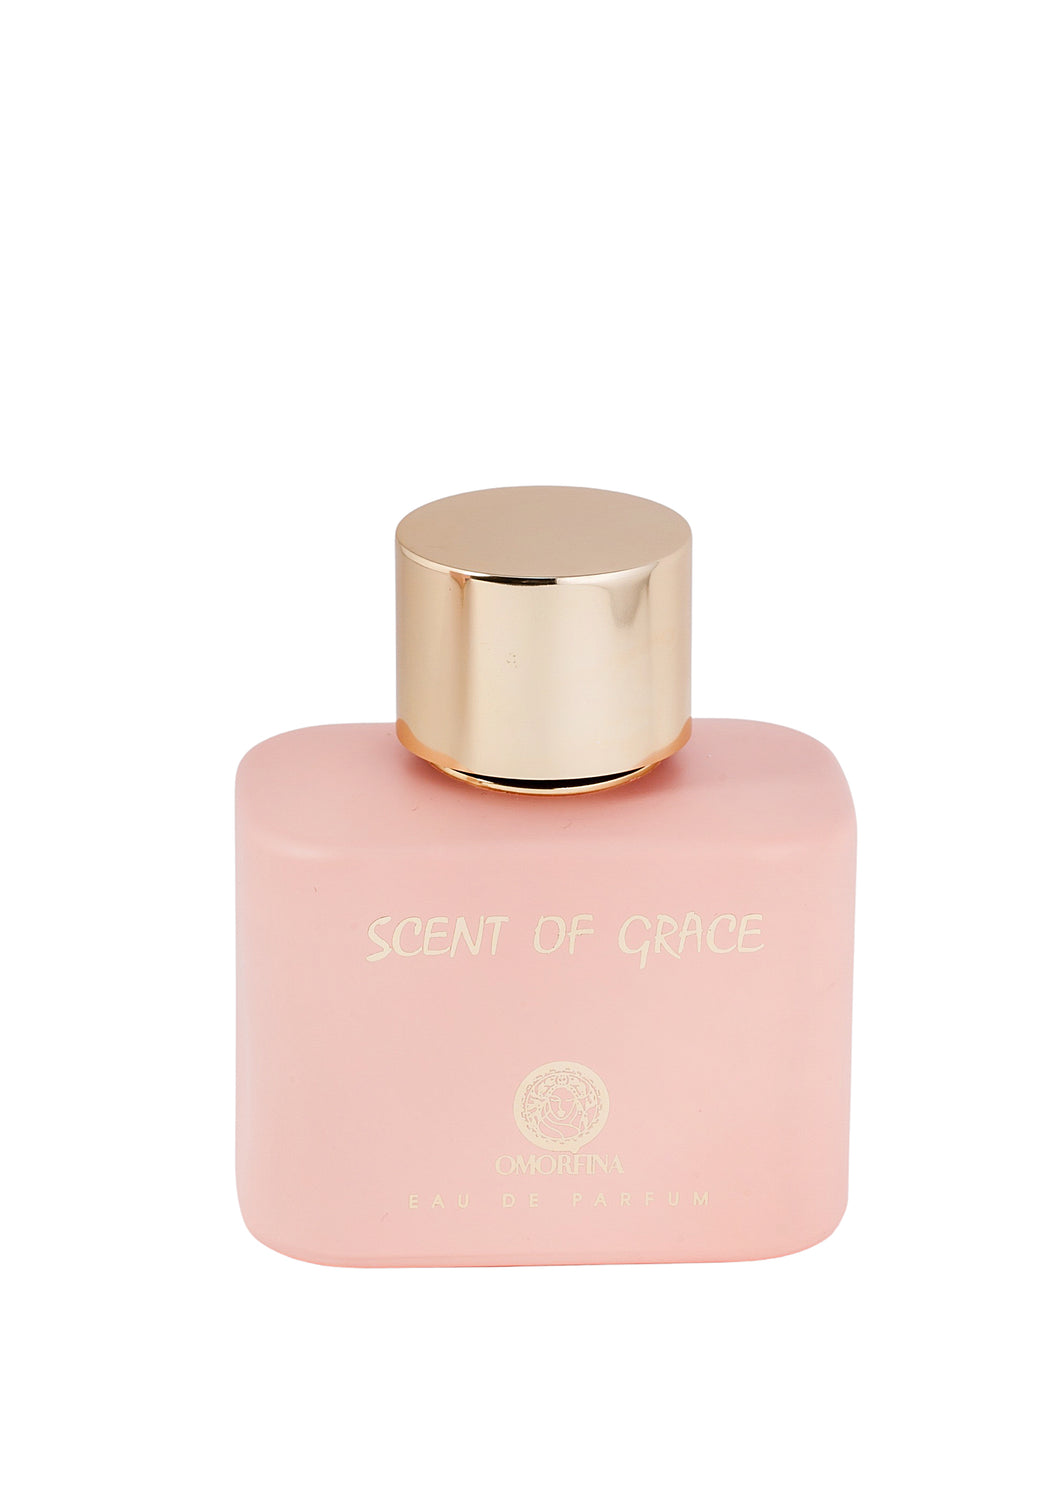 SCENT OF GRACE